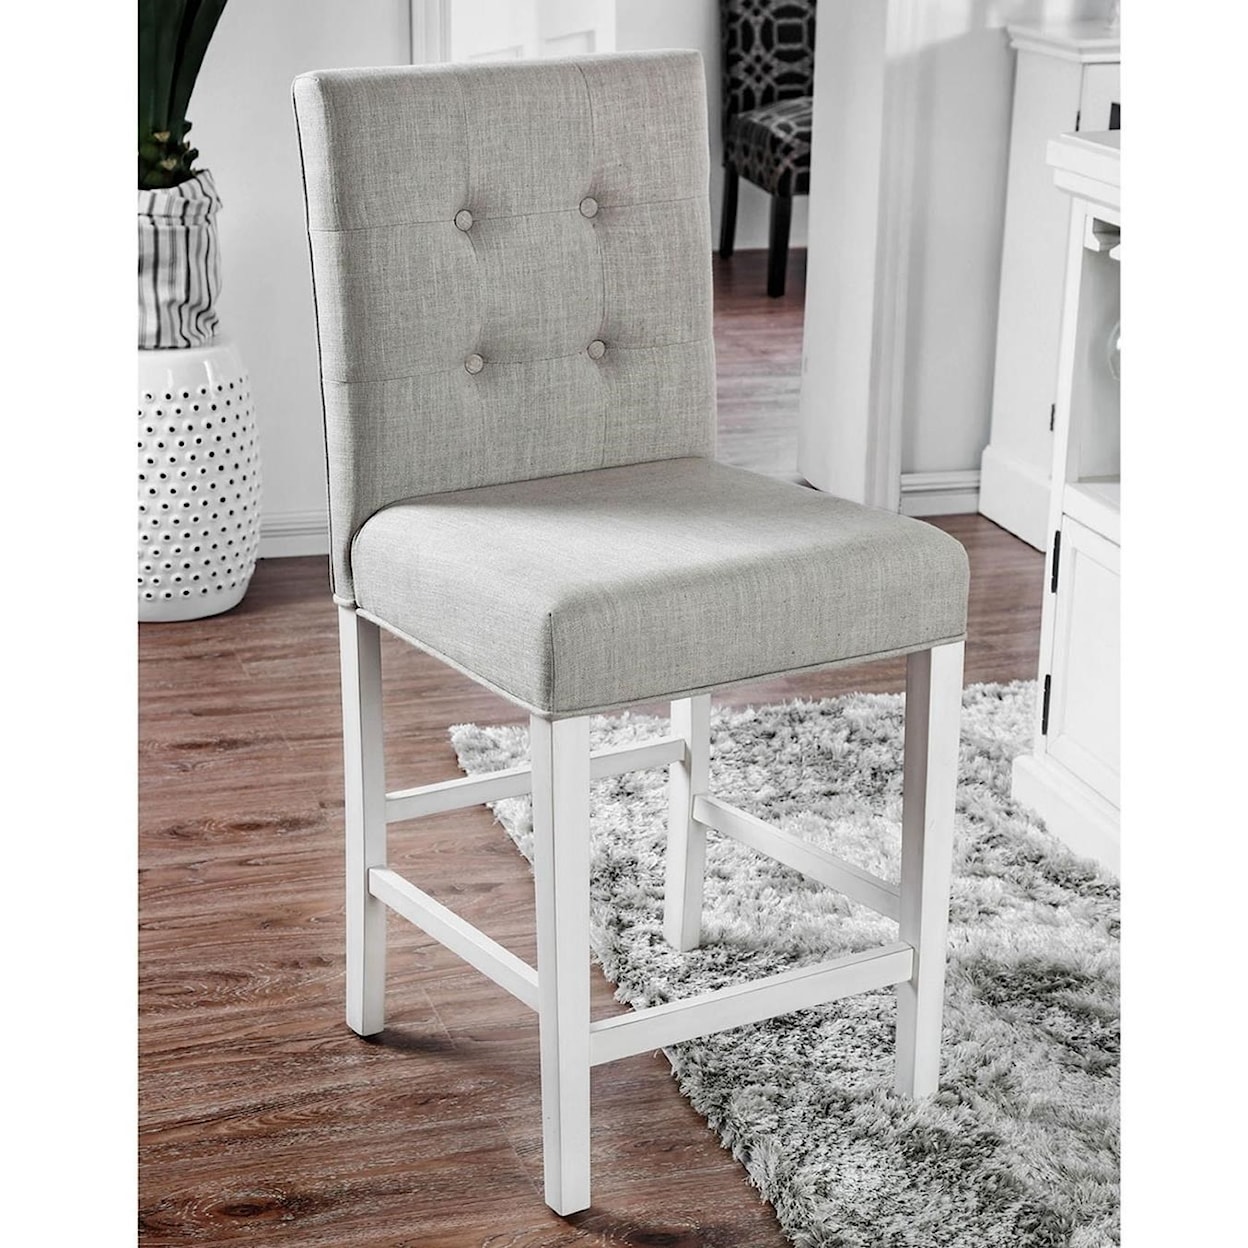 FUSA Sutton Set of 2 Counter Height Chairs